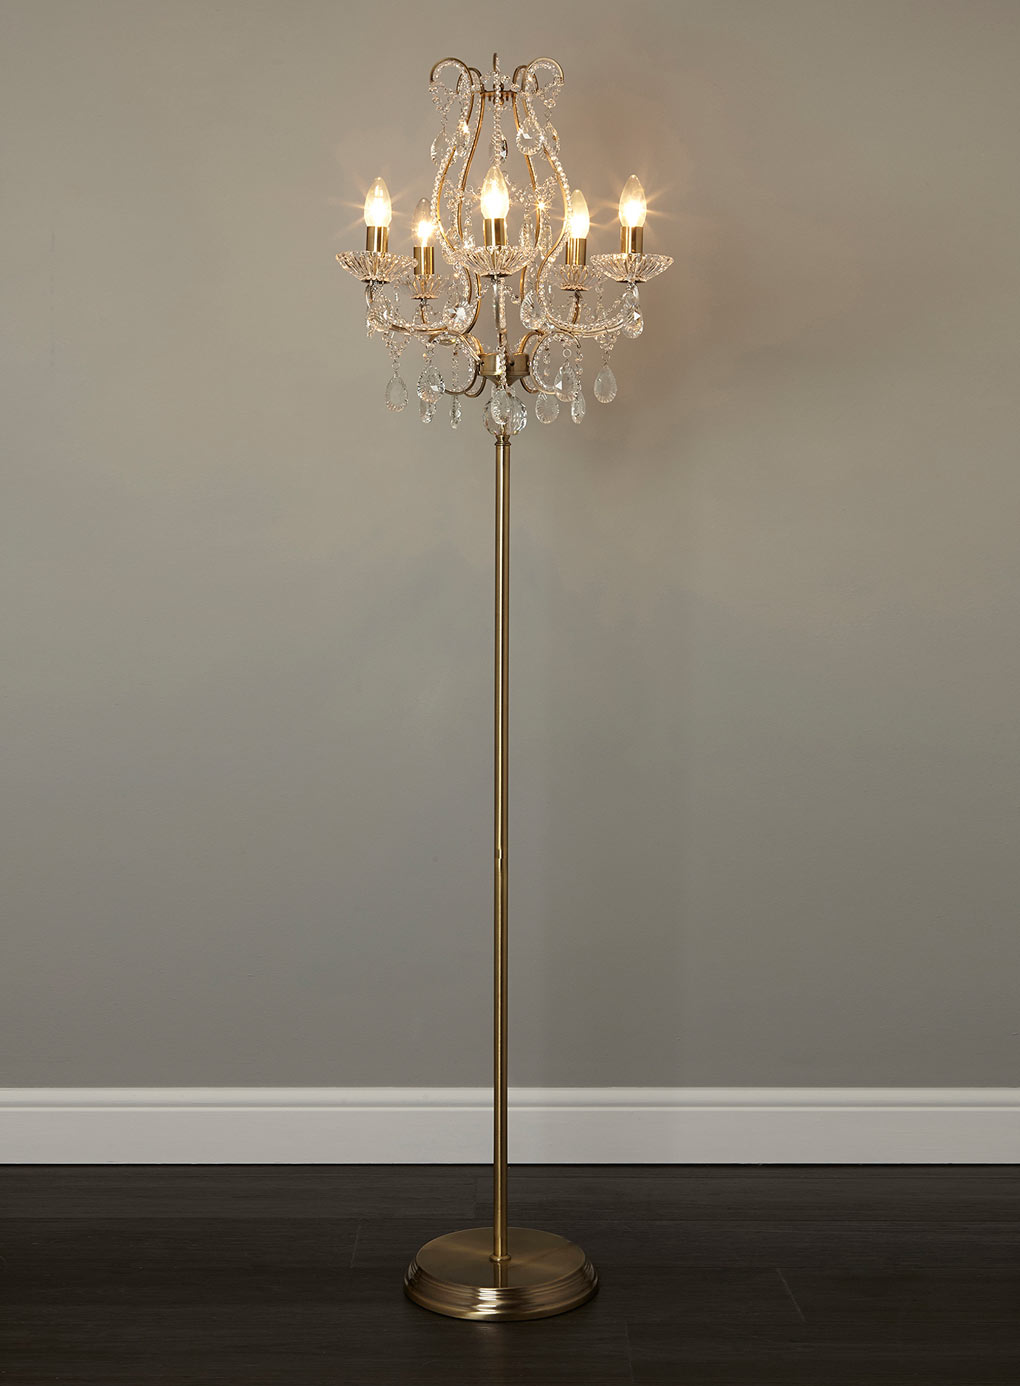 Use Floor Chandelier Lamps For Your Paradise House - Warisan Lighting